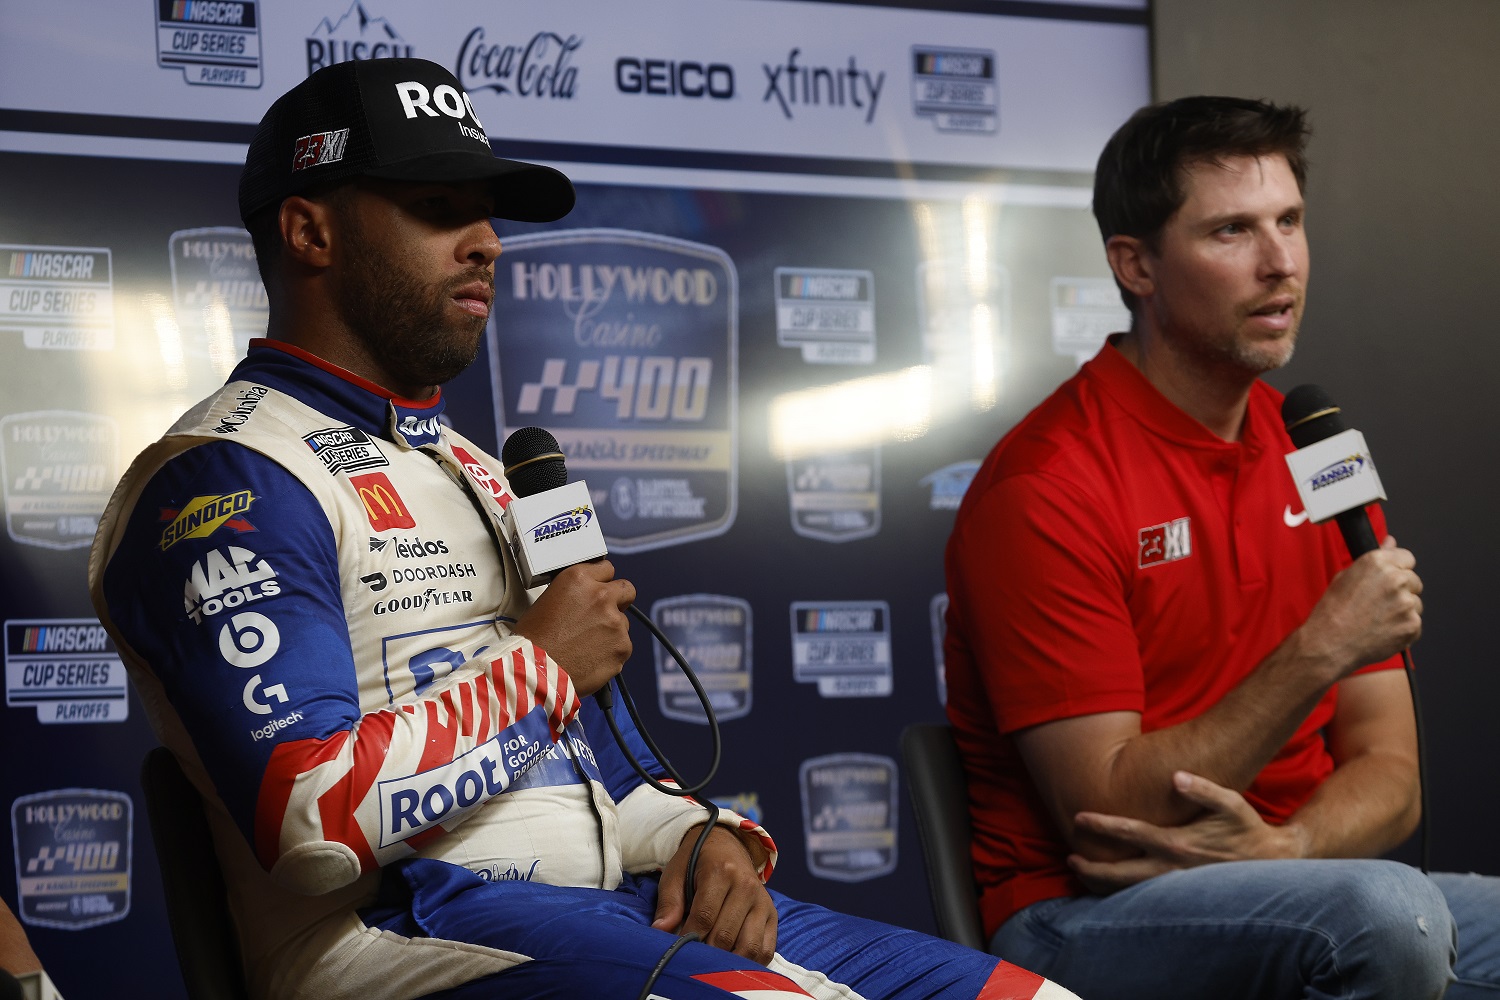 23XI Racing team co-owner Denny Hamlin and driver Bubba Wallace speak to the media during a press conference after winning the NASCAR Cup Series Hollywood Casino 400 at Kansas Speedway on Sept. 11, 2022. | Chris Graythen/Getty Images